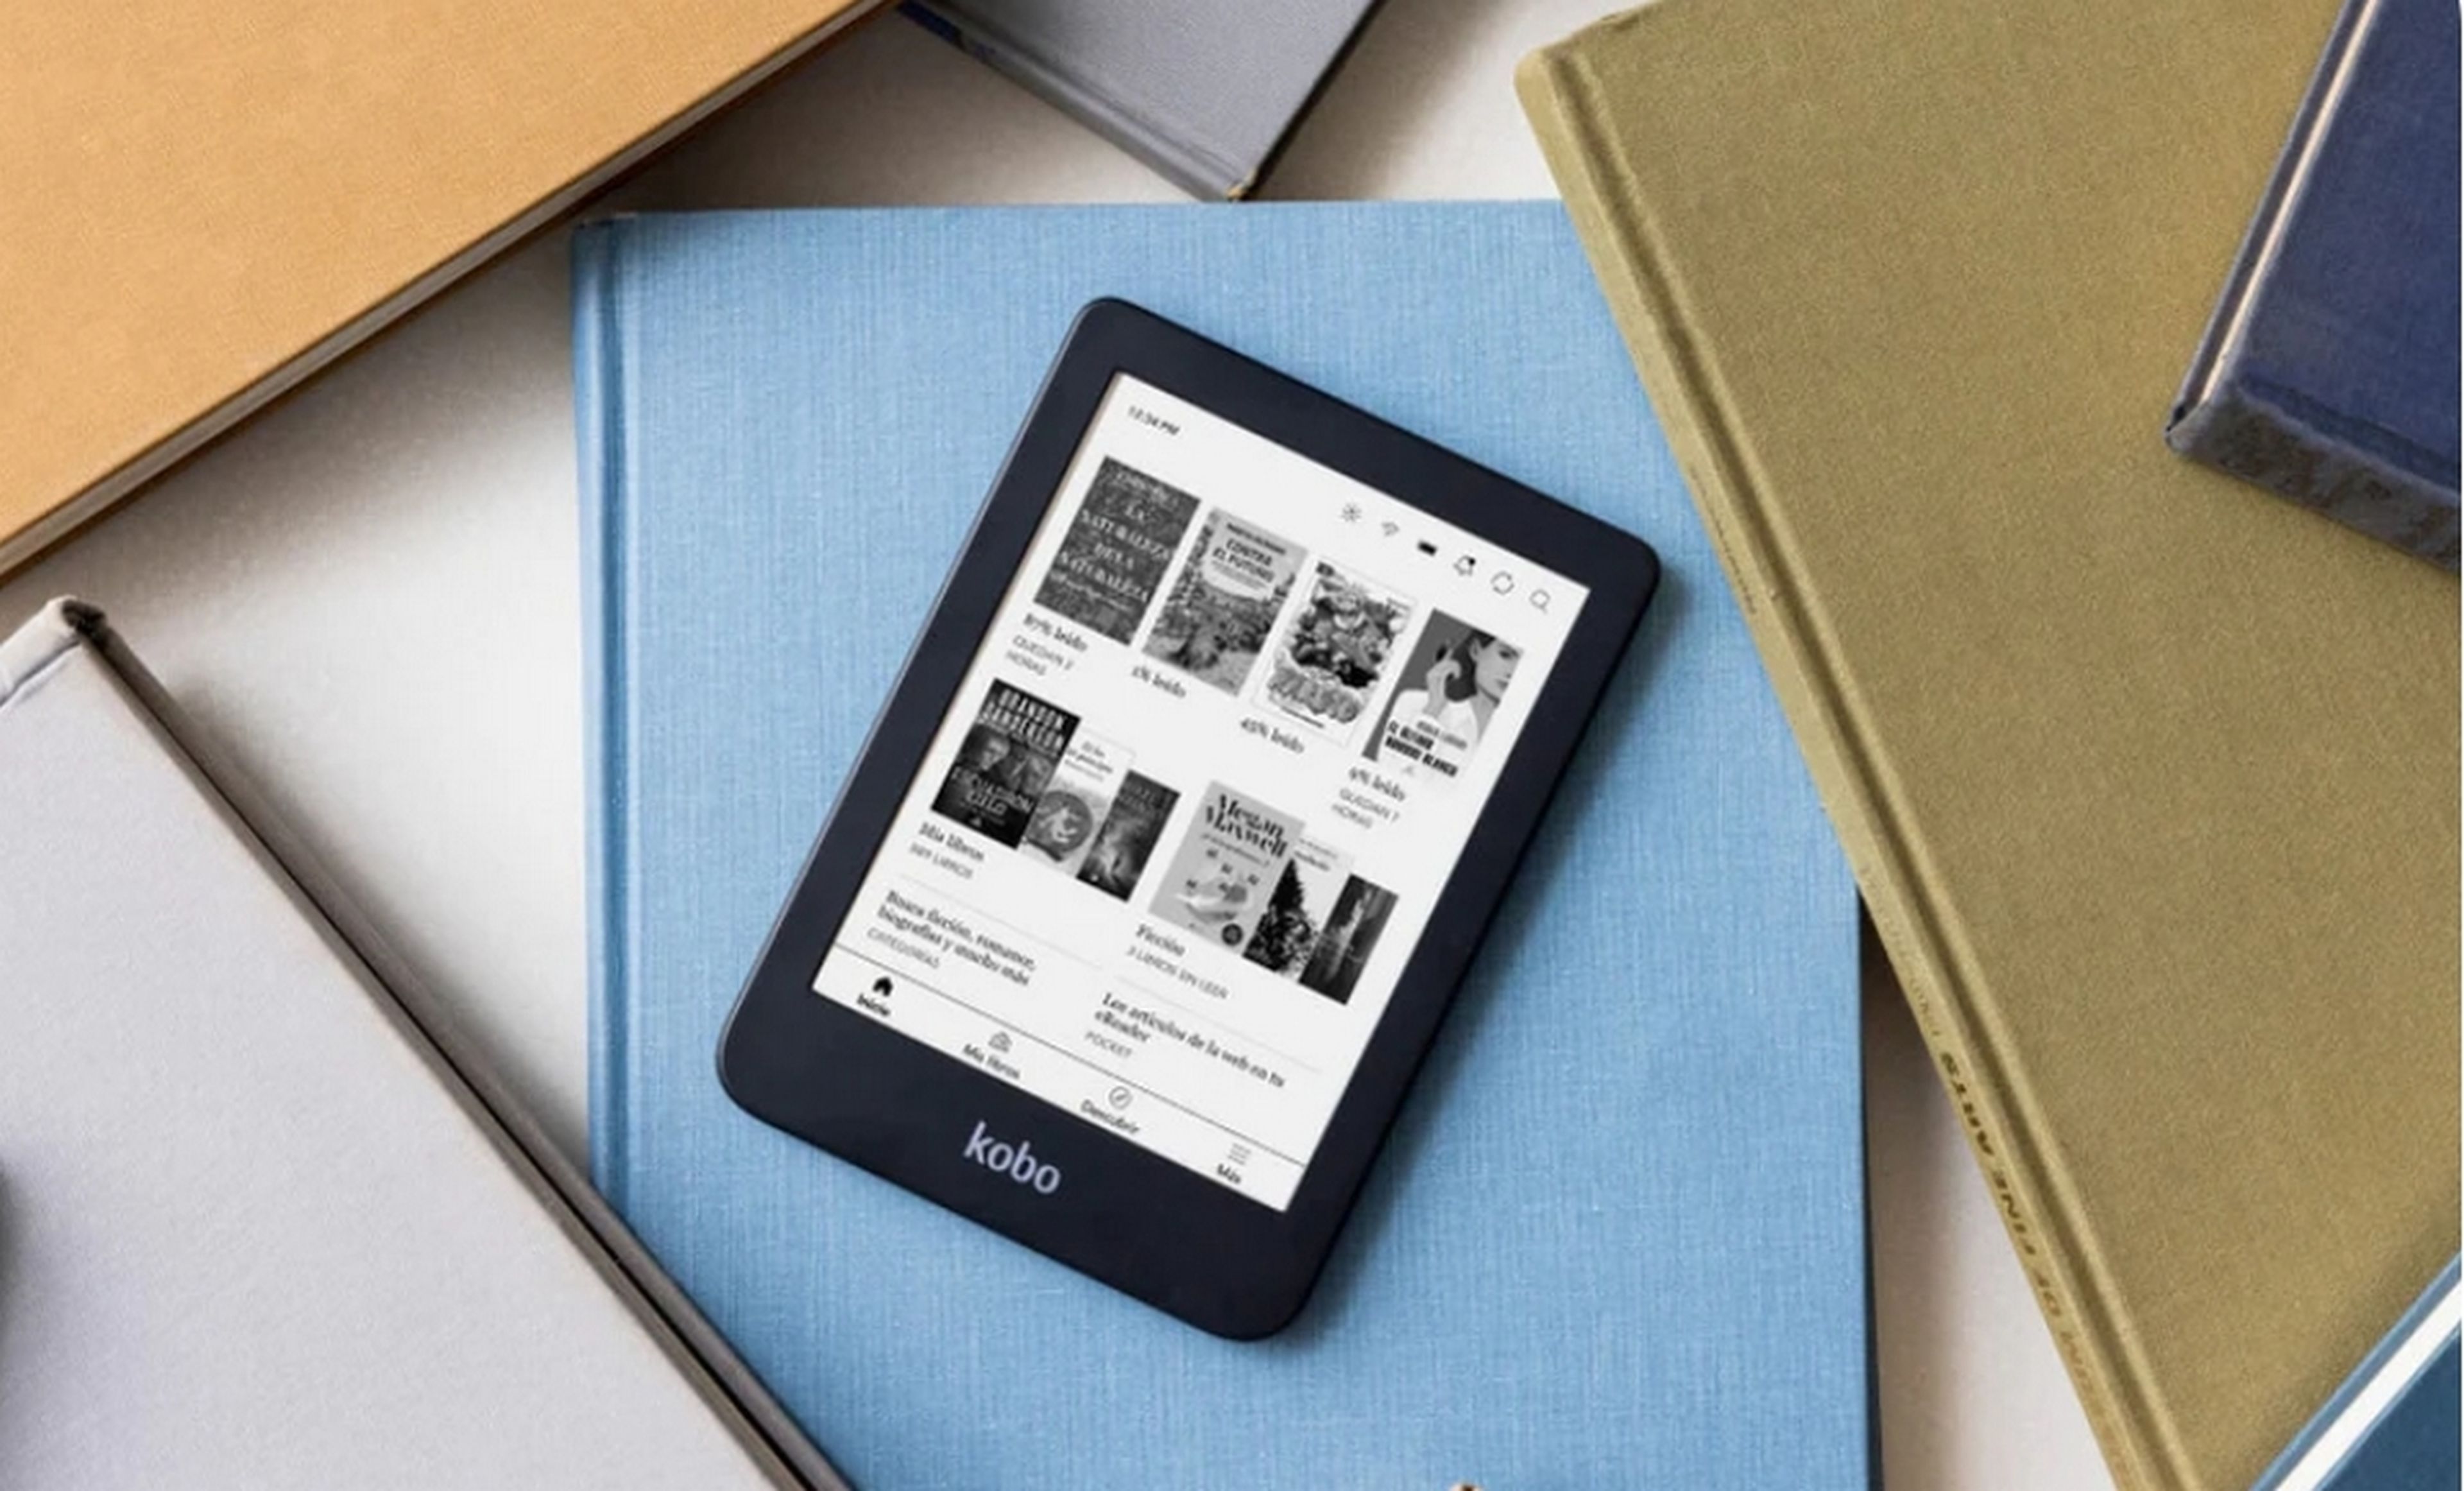 Amazon Kindle doesn't arrive before Christmas, but this Kobo ebook does and it's on sale